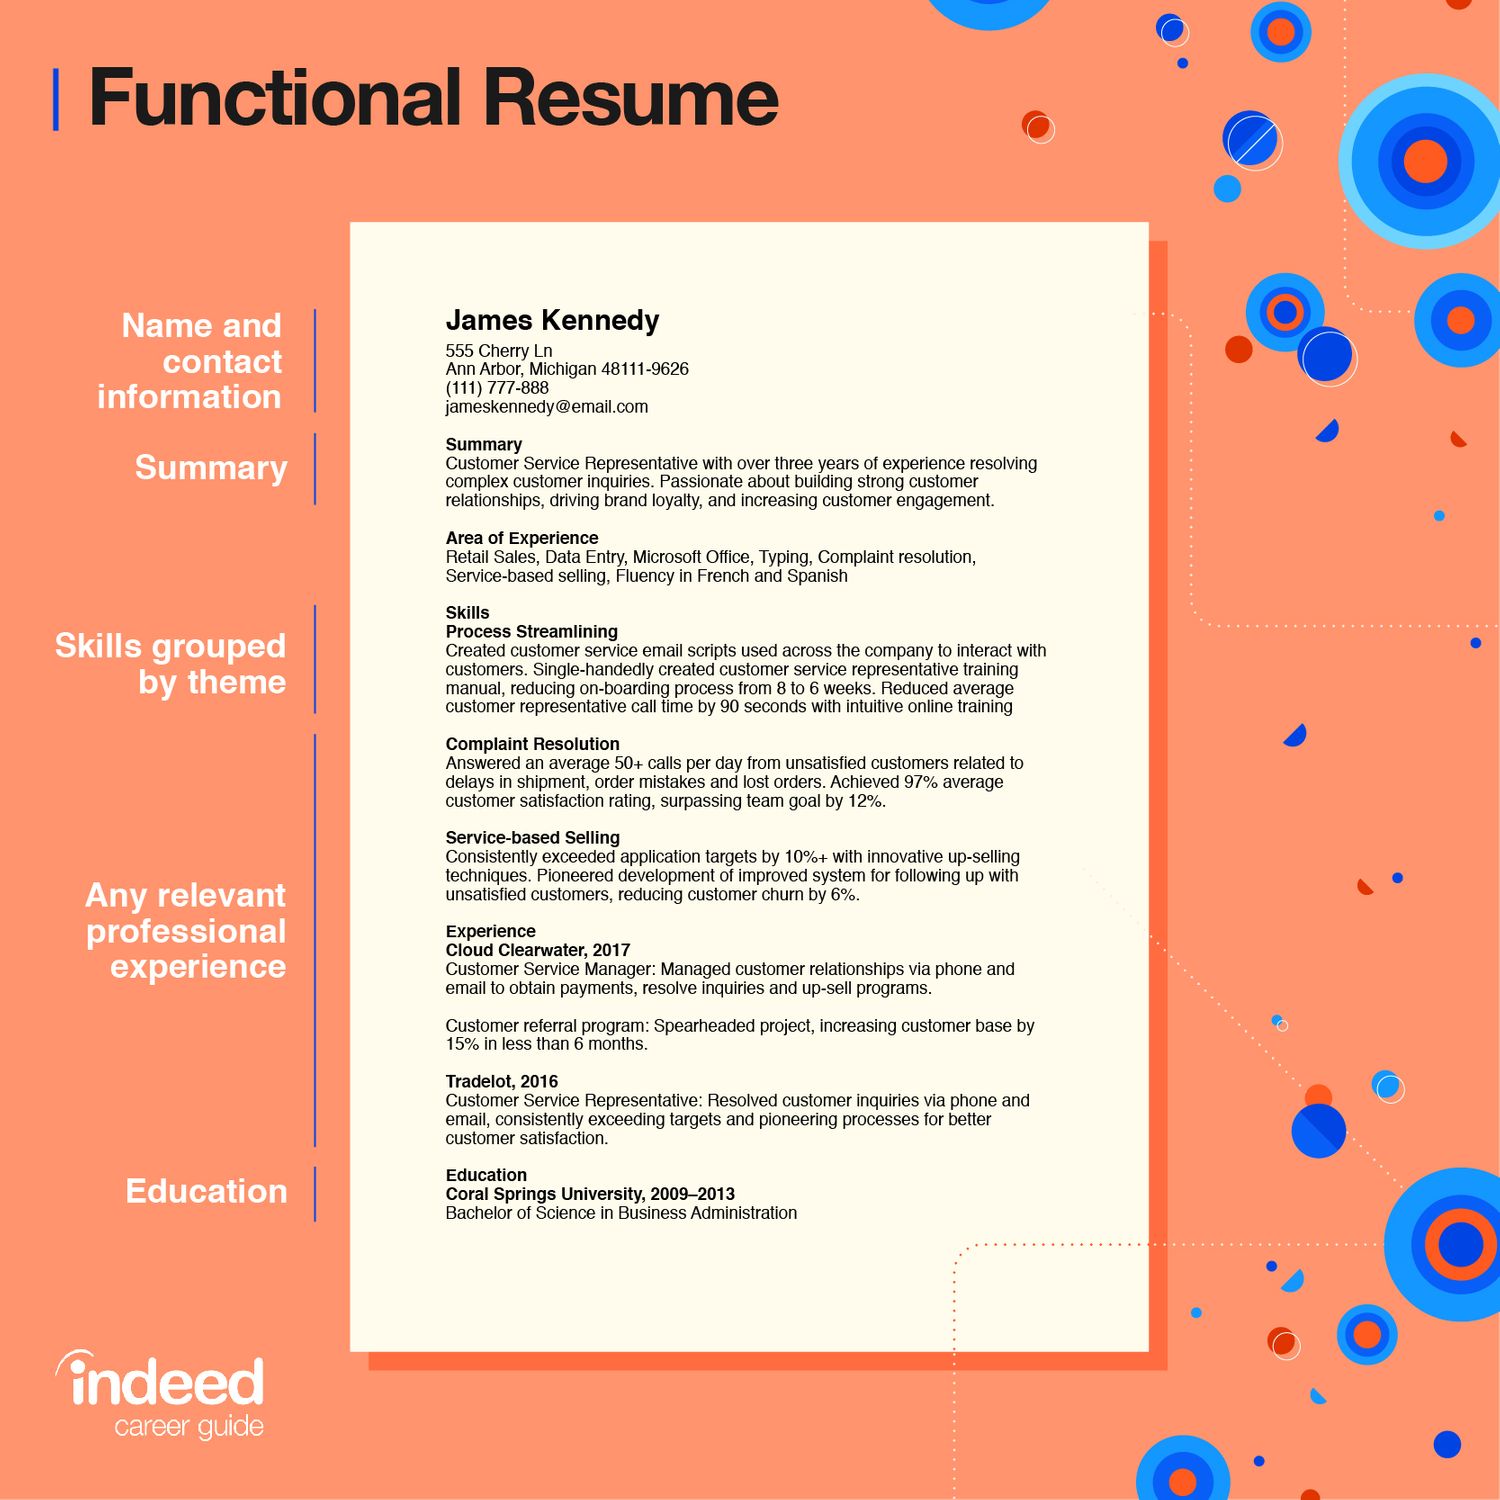 How To Make a Comprehensive Resume (With Examples) 